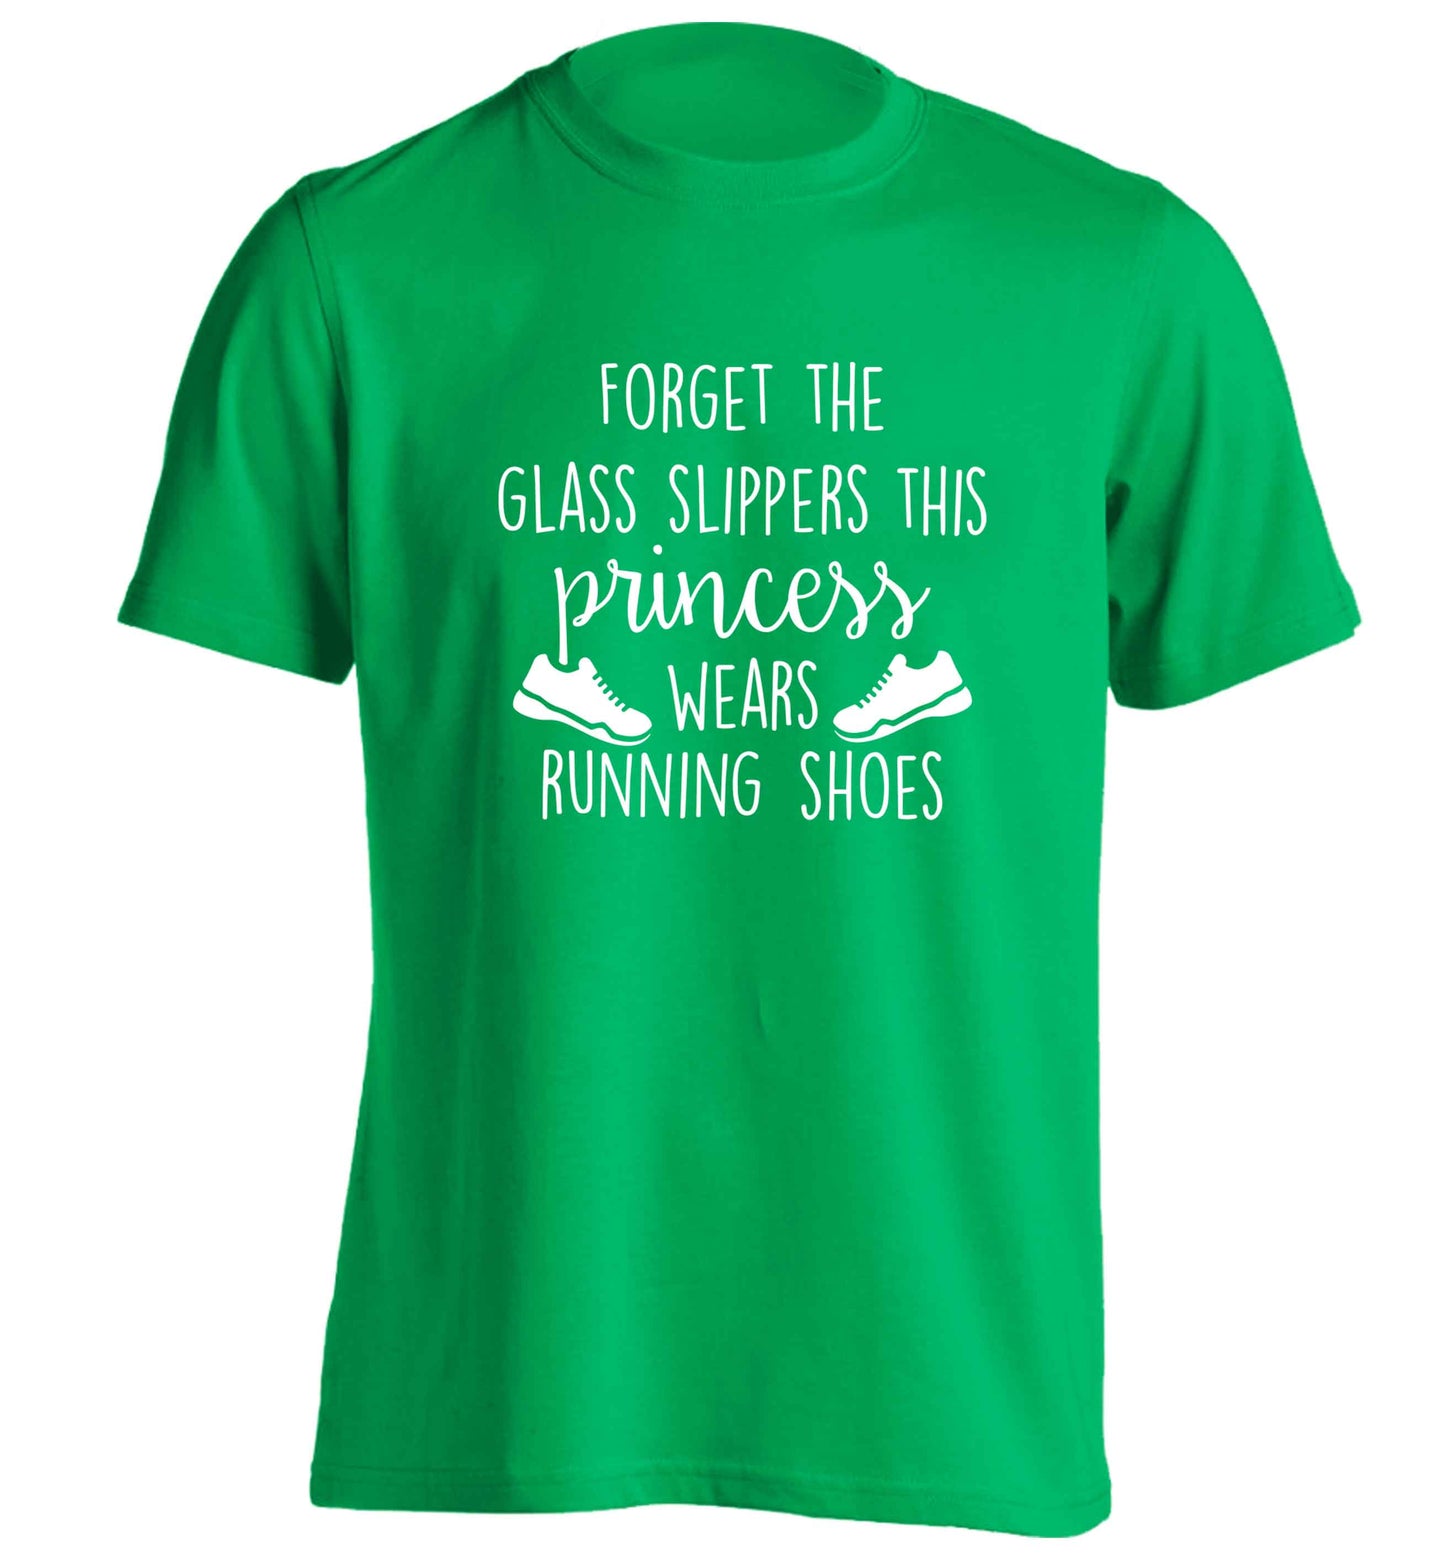 Forget the glass slippers this princess wears running shoes adults unisex green Tshirt 2XL